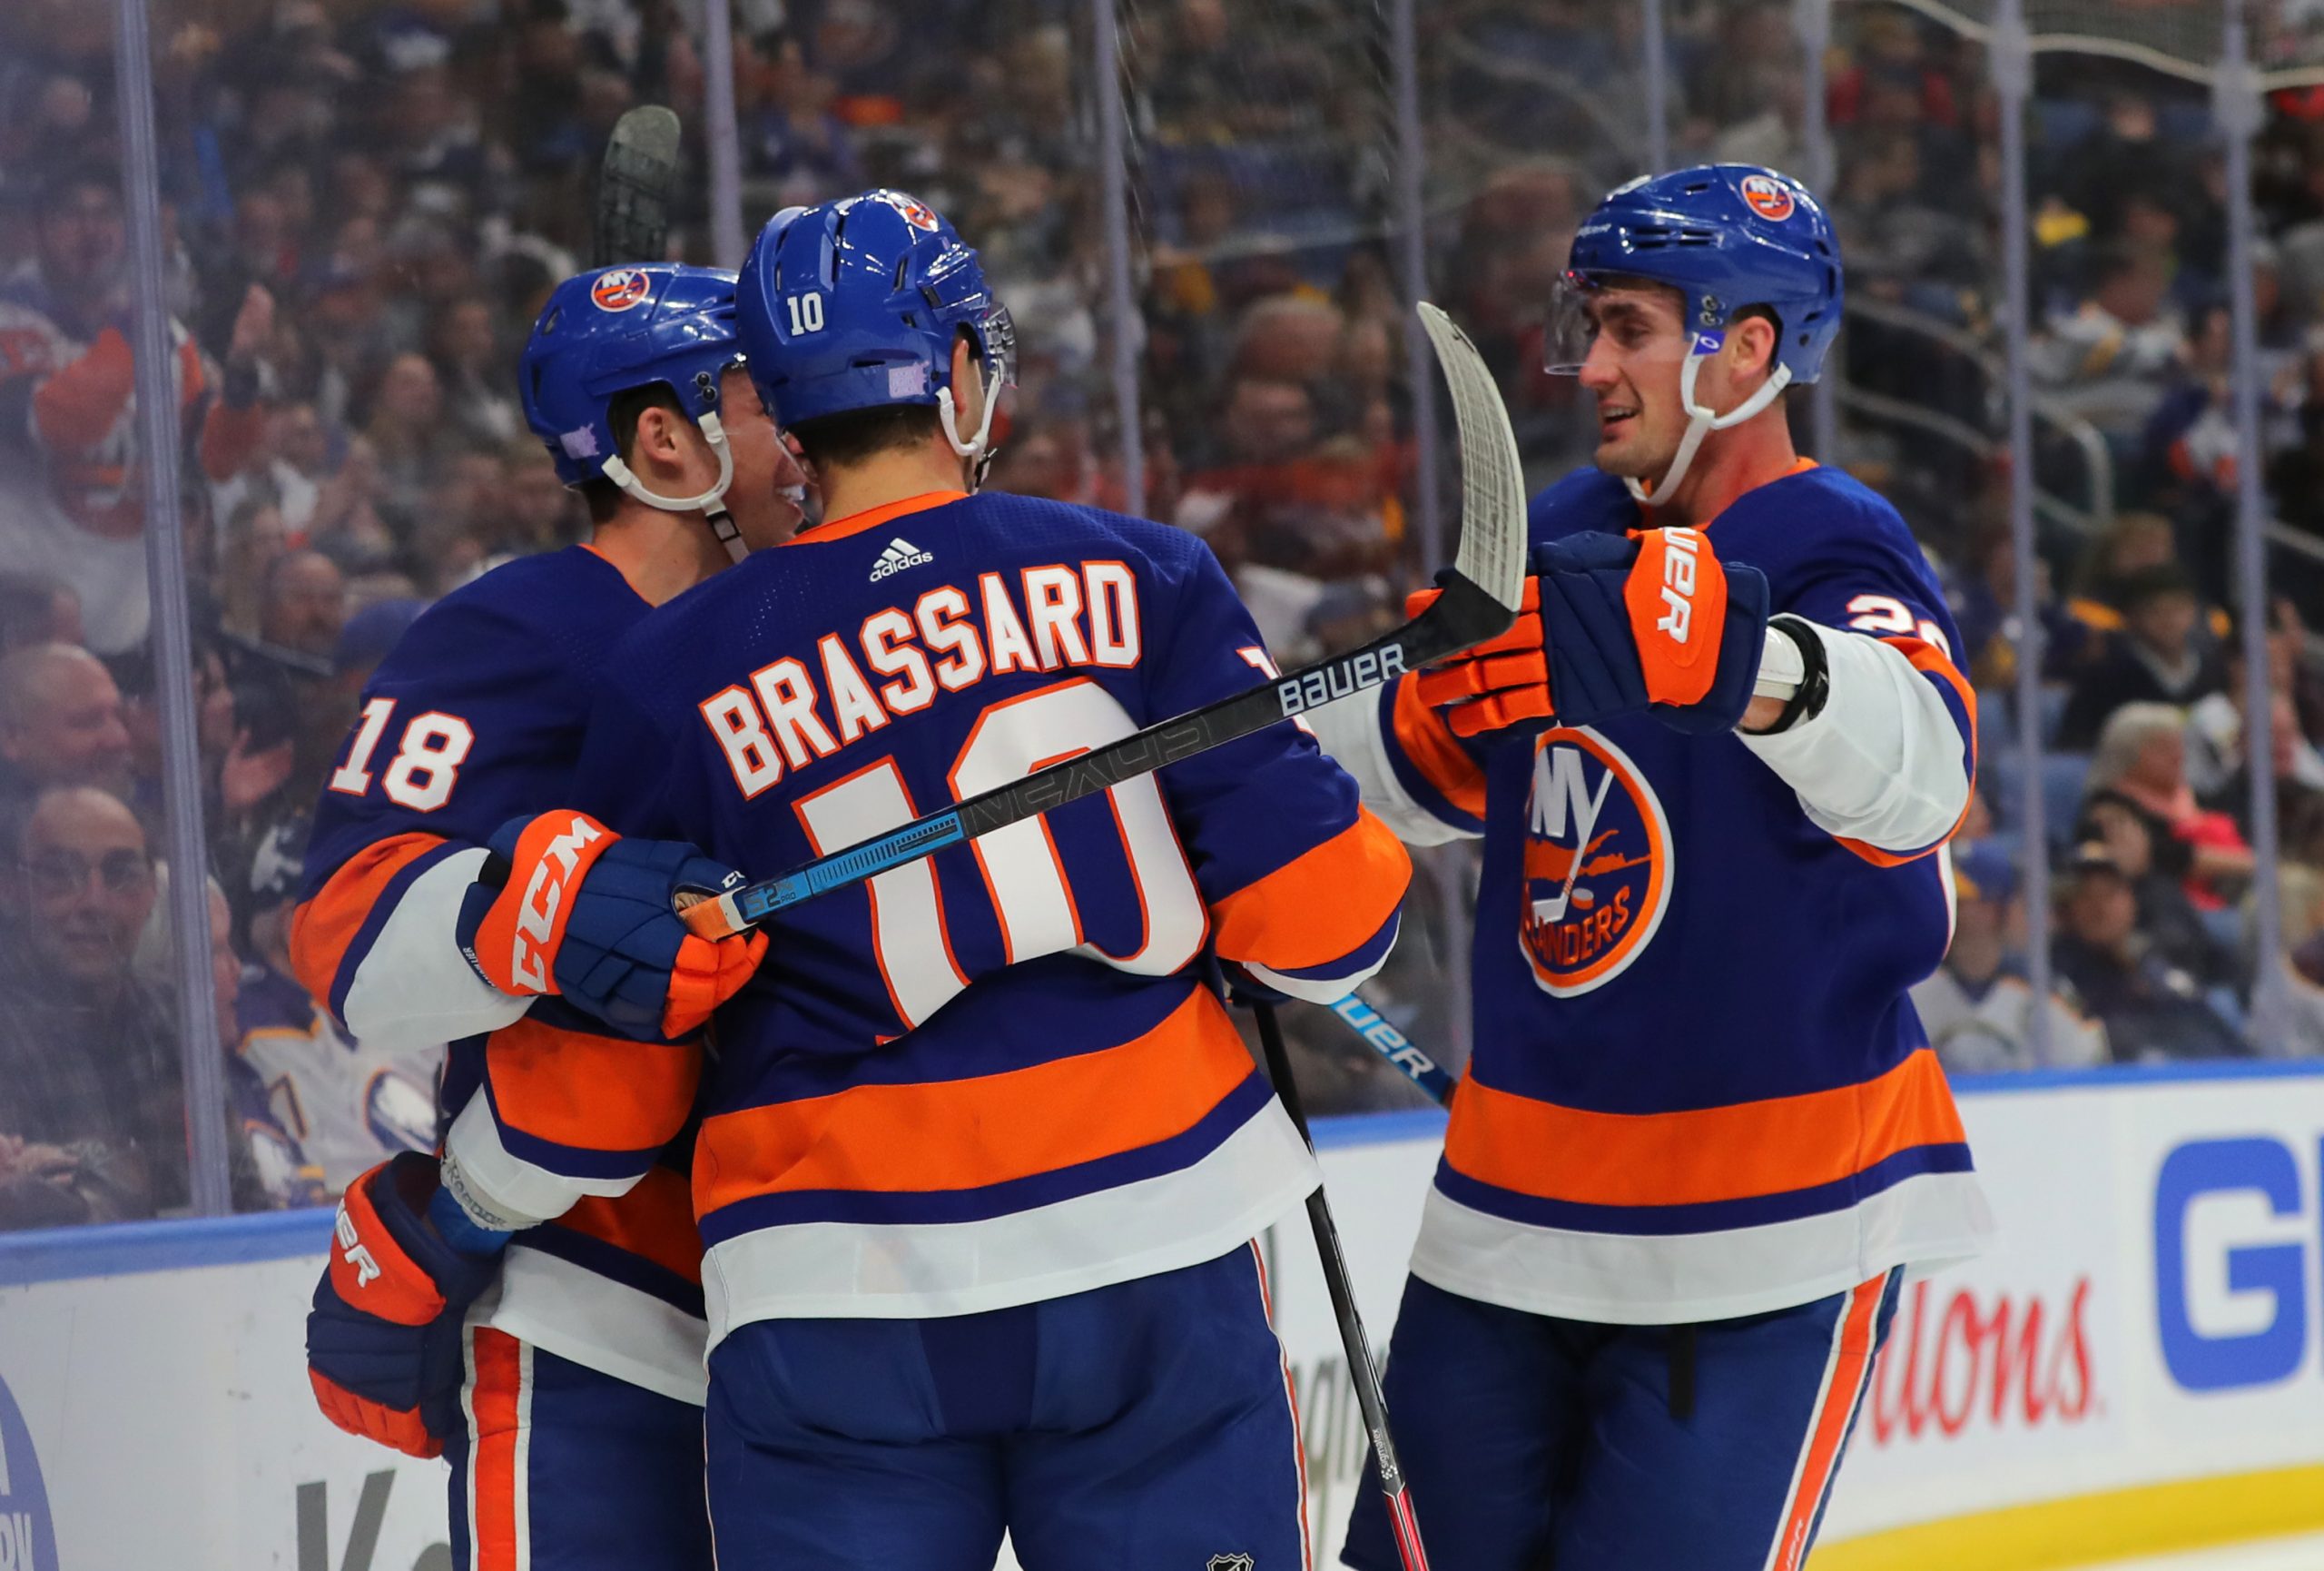 Nov 2, 2019; Buffalo, NY, USA; New York Islanders center Derick Brassard (10) celebrates with teammates after scoring a goal during the first period against the Buffalo Sabres at KeyBank Center. Mandatory Credit: Timothy T. Ludwig-USA TODAY Sports